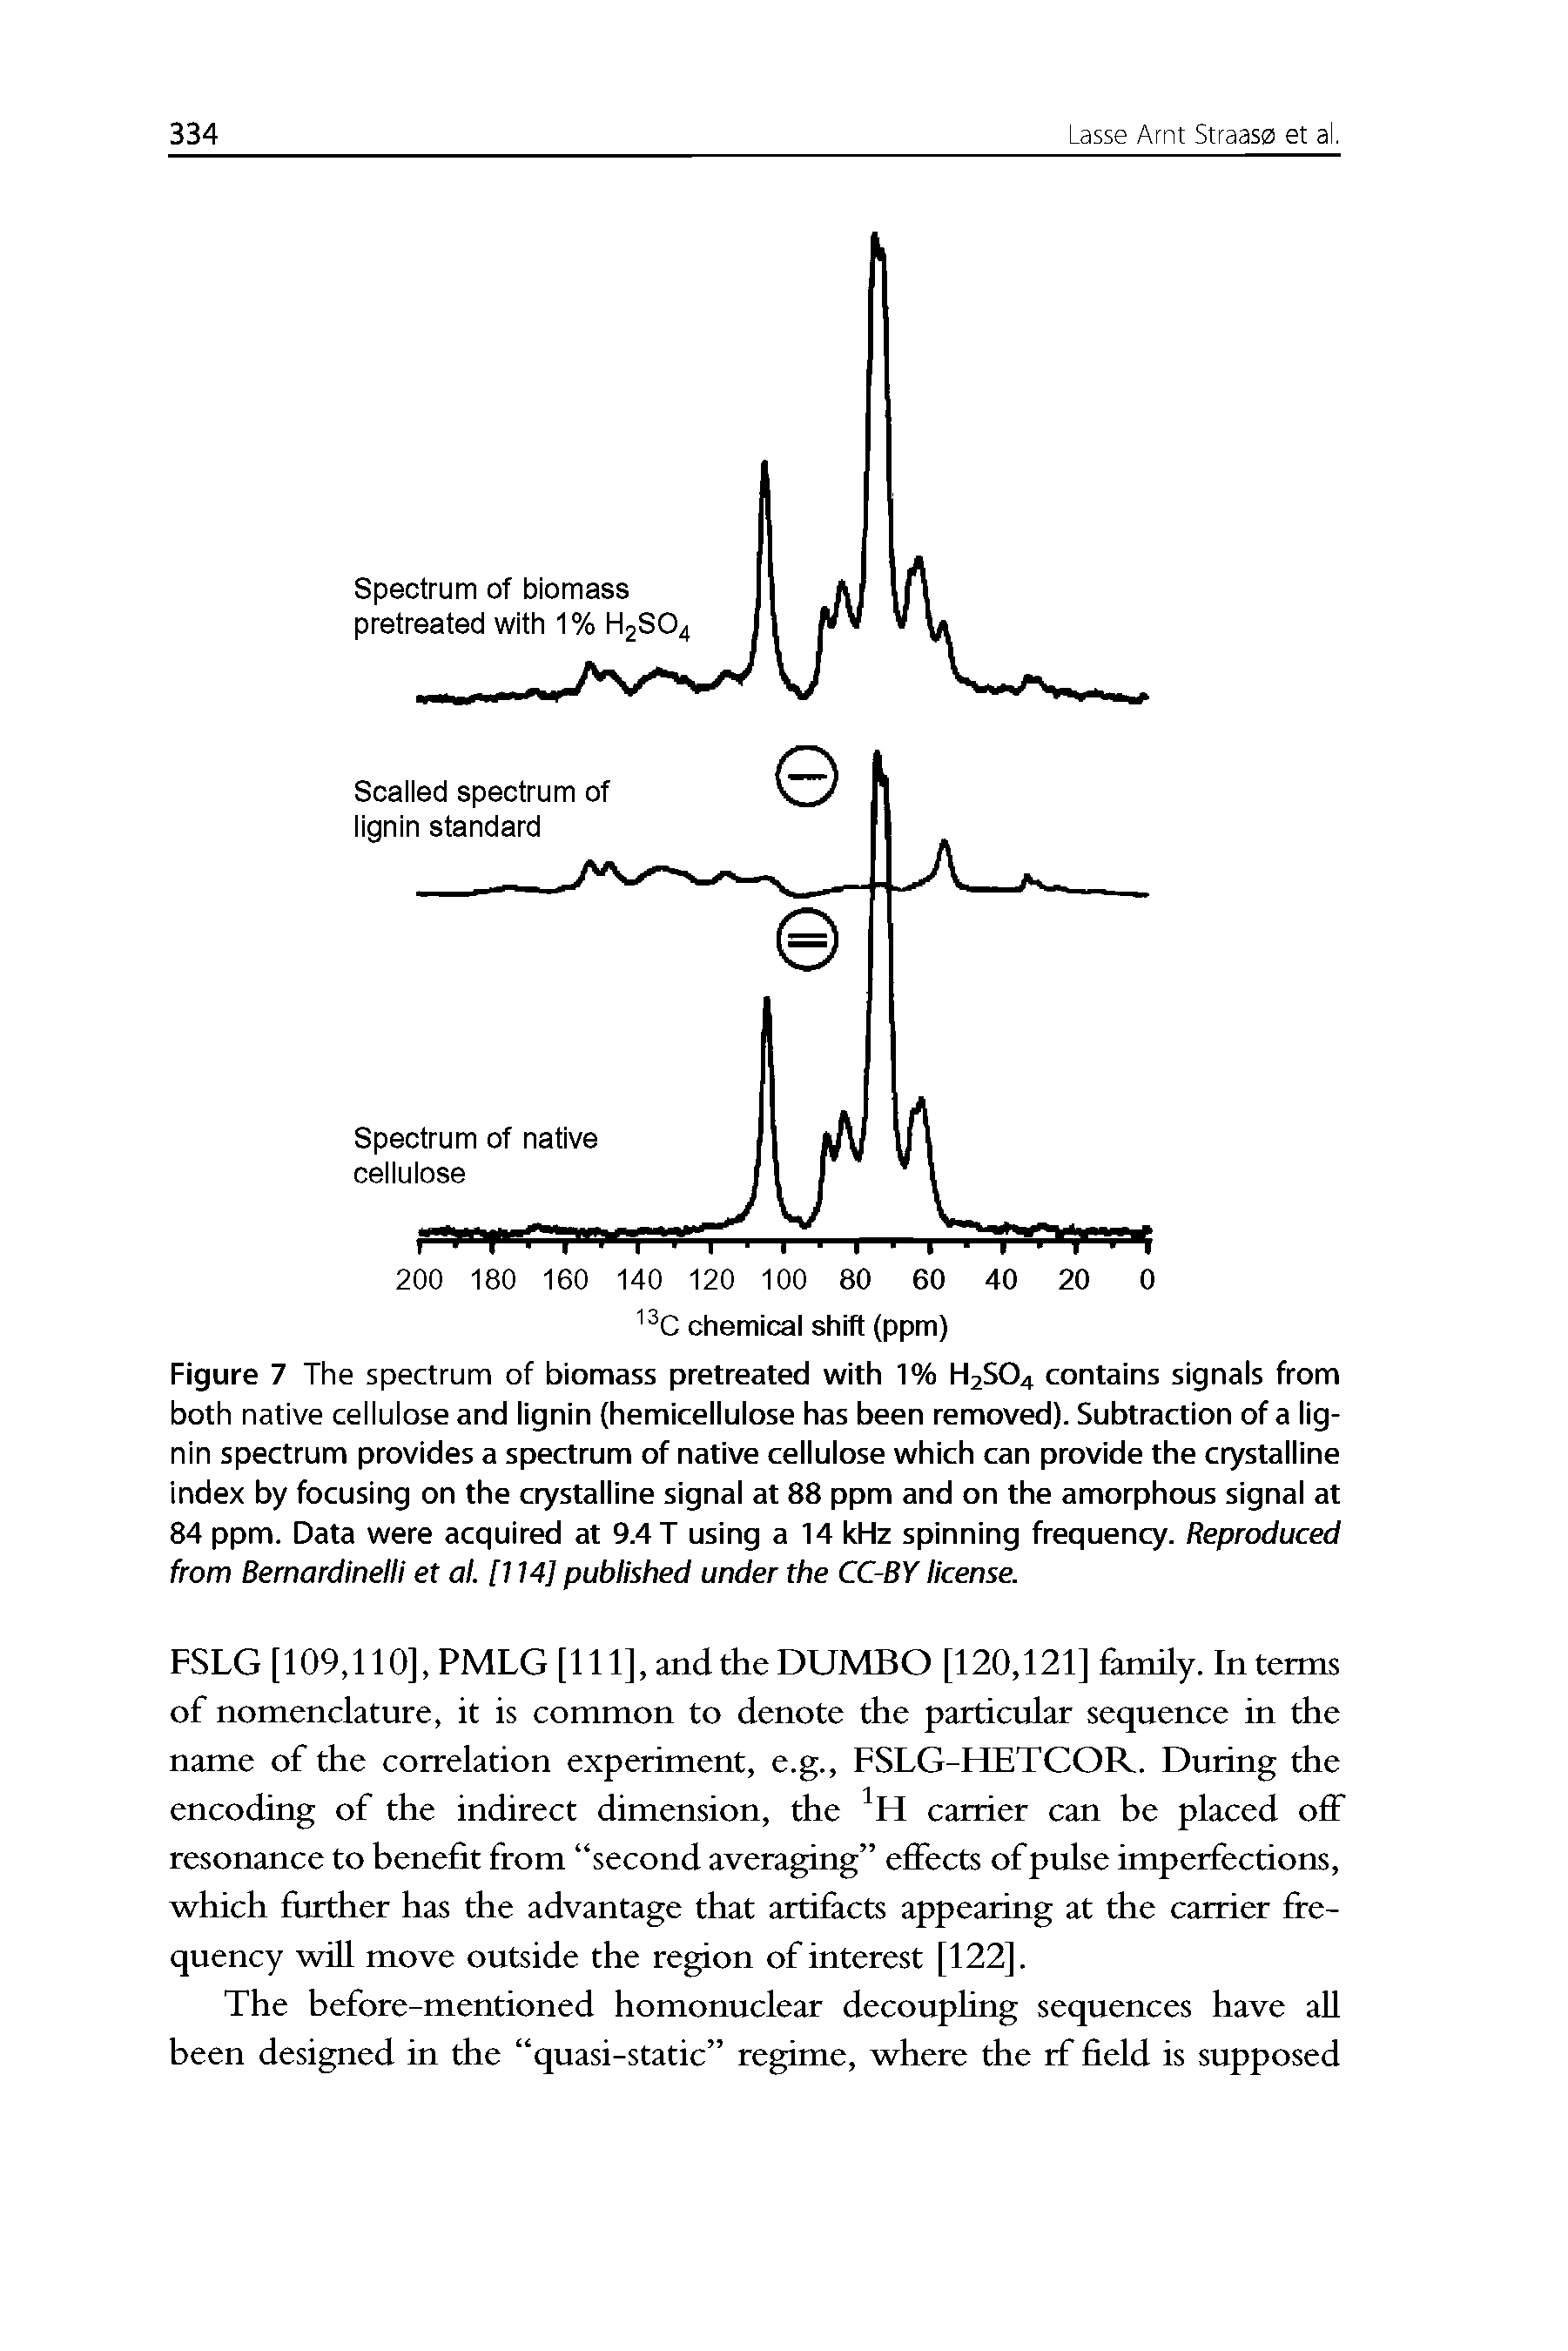 Figure 7 The spectrum of biomass pretreated with 1% H2SO4 contains signals from both native cellulose and lignin (hemicellulose has been removed). Subtraction of a lignin spectrum provides a spectrum of native cellulose which can provide the crystalline index by focusing on the crystalline signal at 88 ppm and on the amorphous signal at 84 ppm. Data were acquired at 9.4 T using a 14 kHz spinning frequency. Reproduced from Bemardinelli et al. [114] published under the CC-BY license.